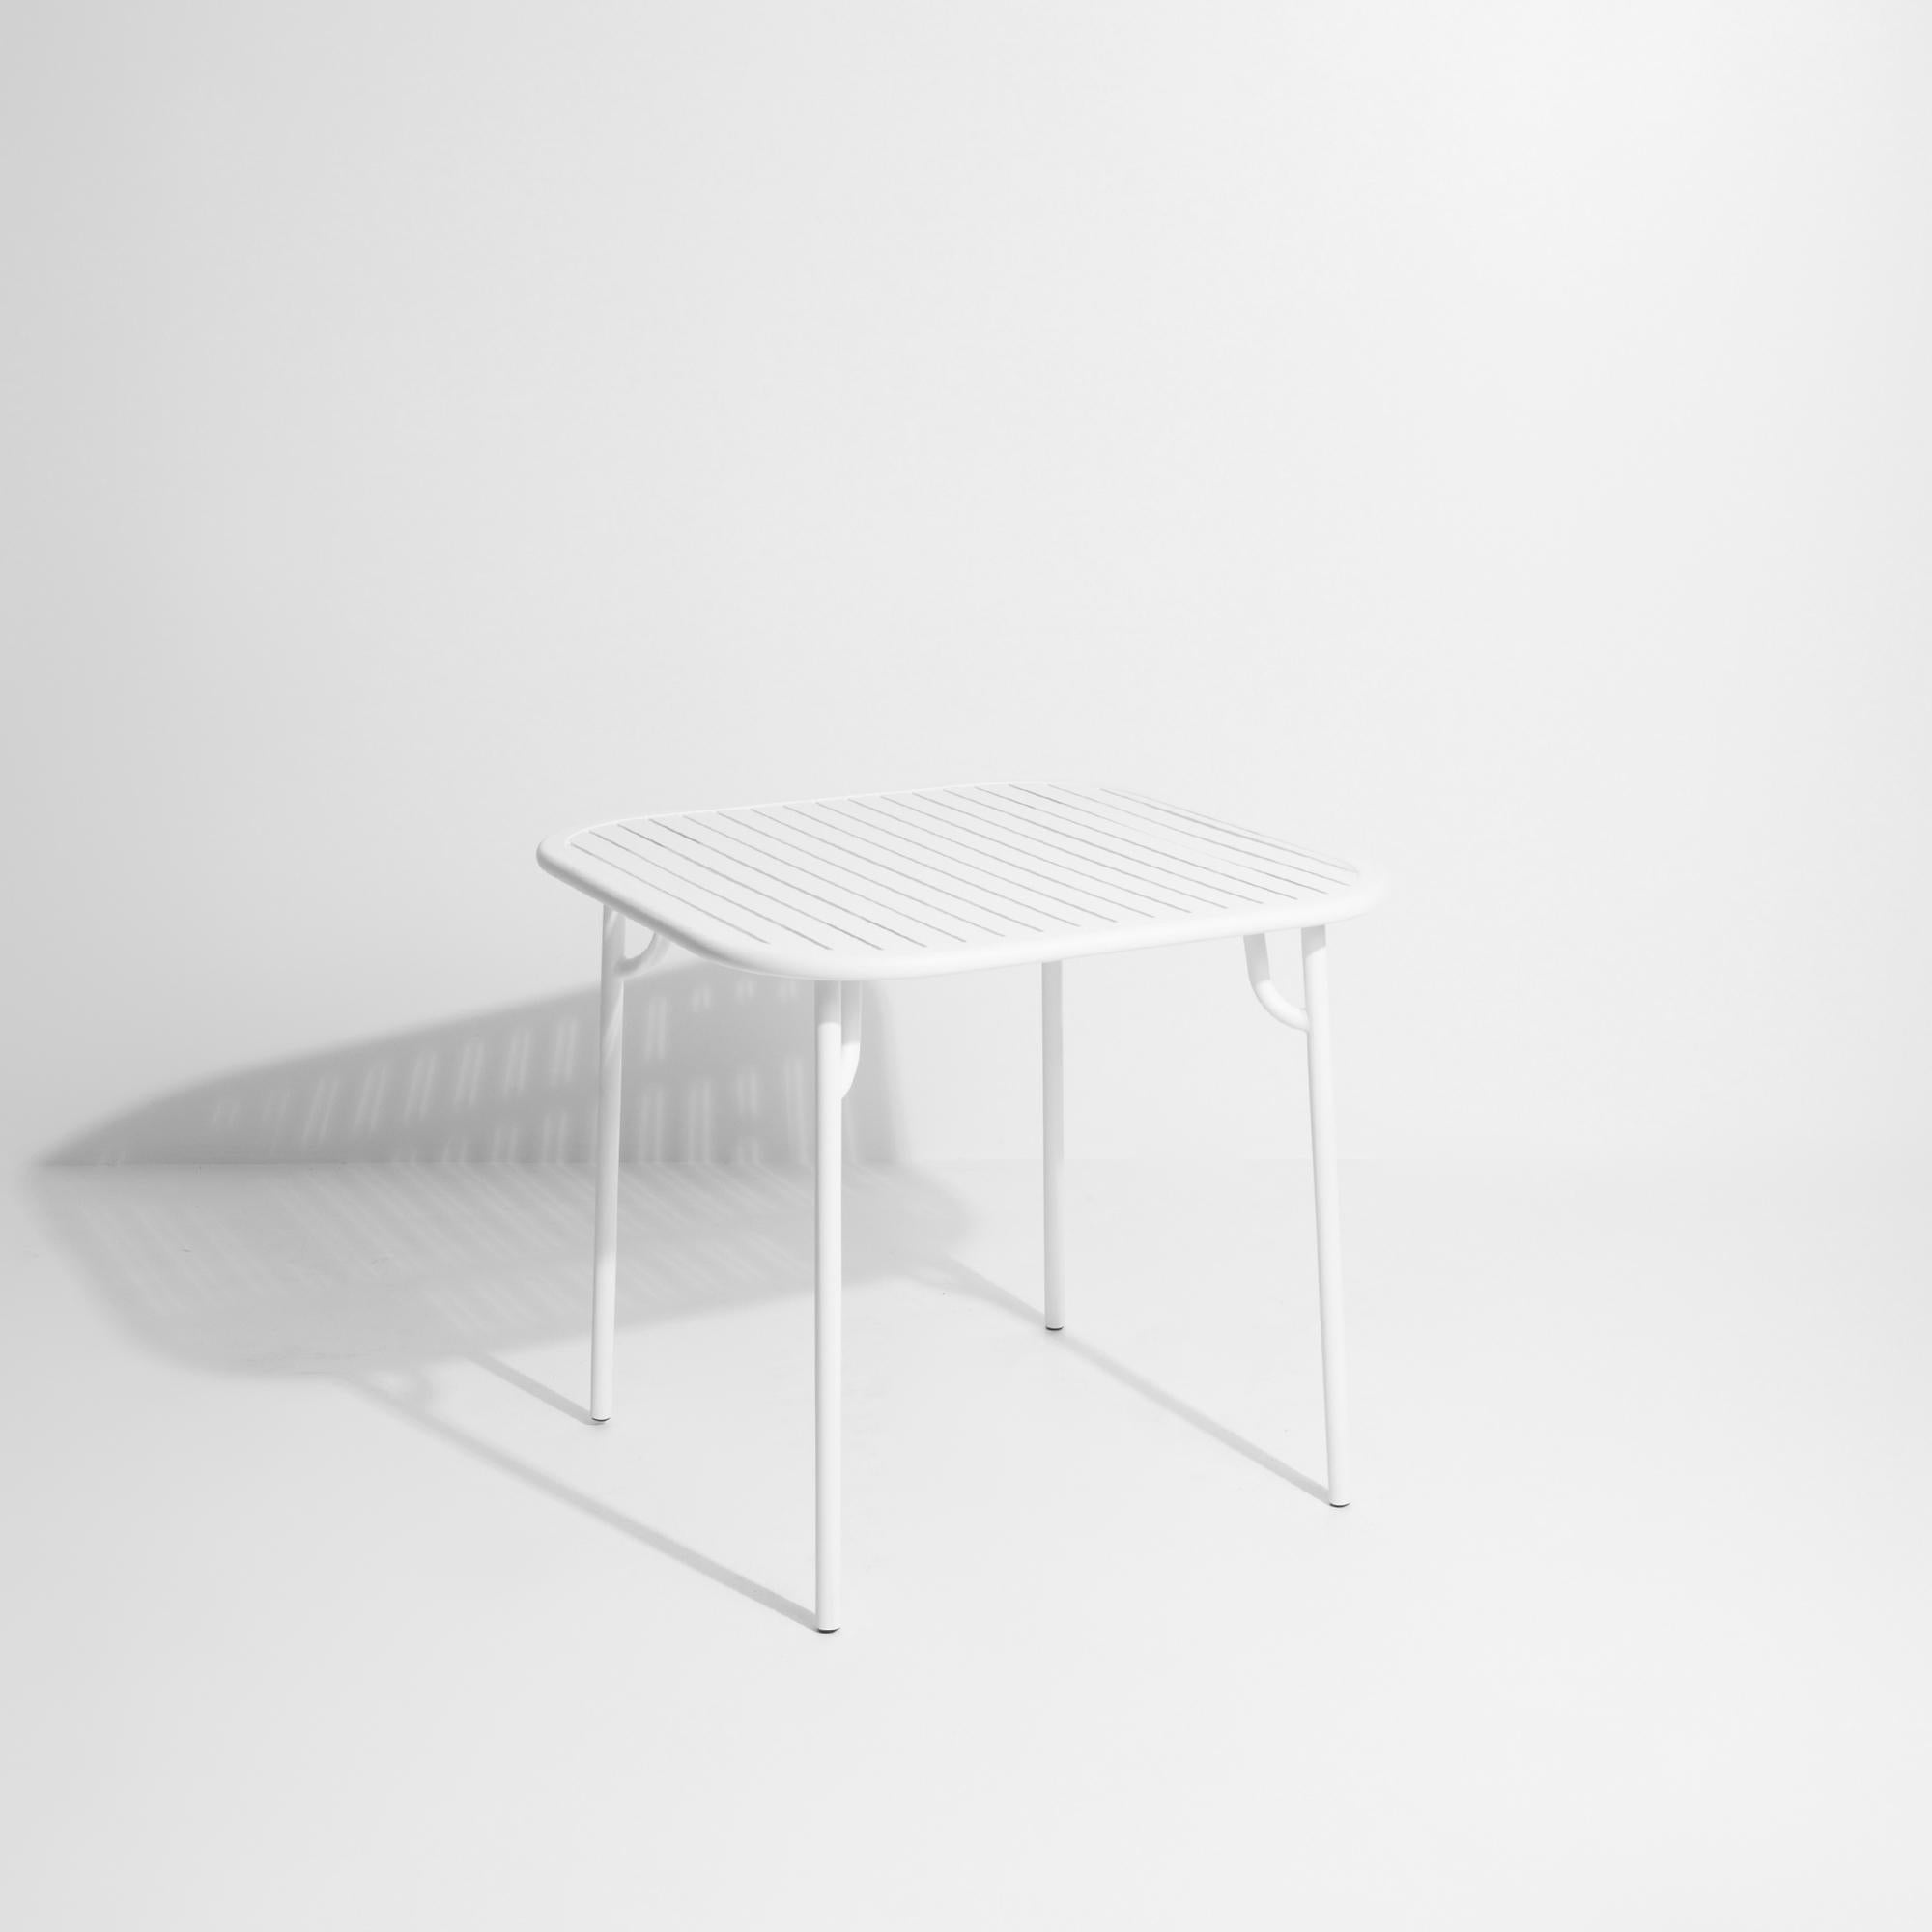 Chinese Petite Friture Week-End Square Dining Table in White Aluminium with Slats For Sale